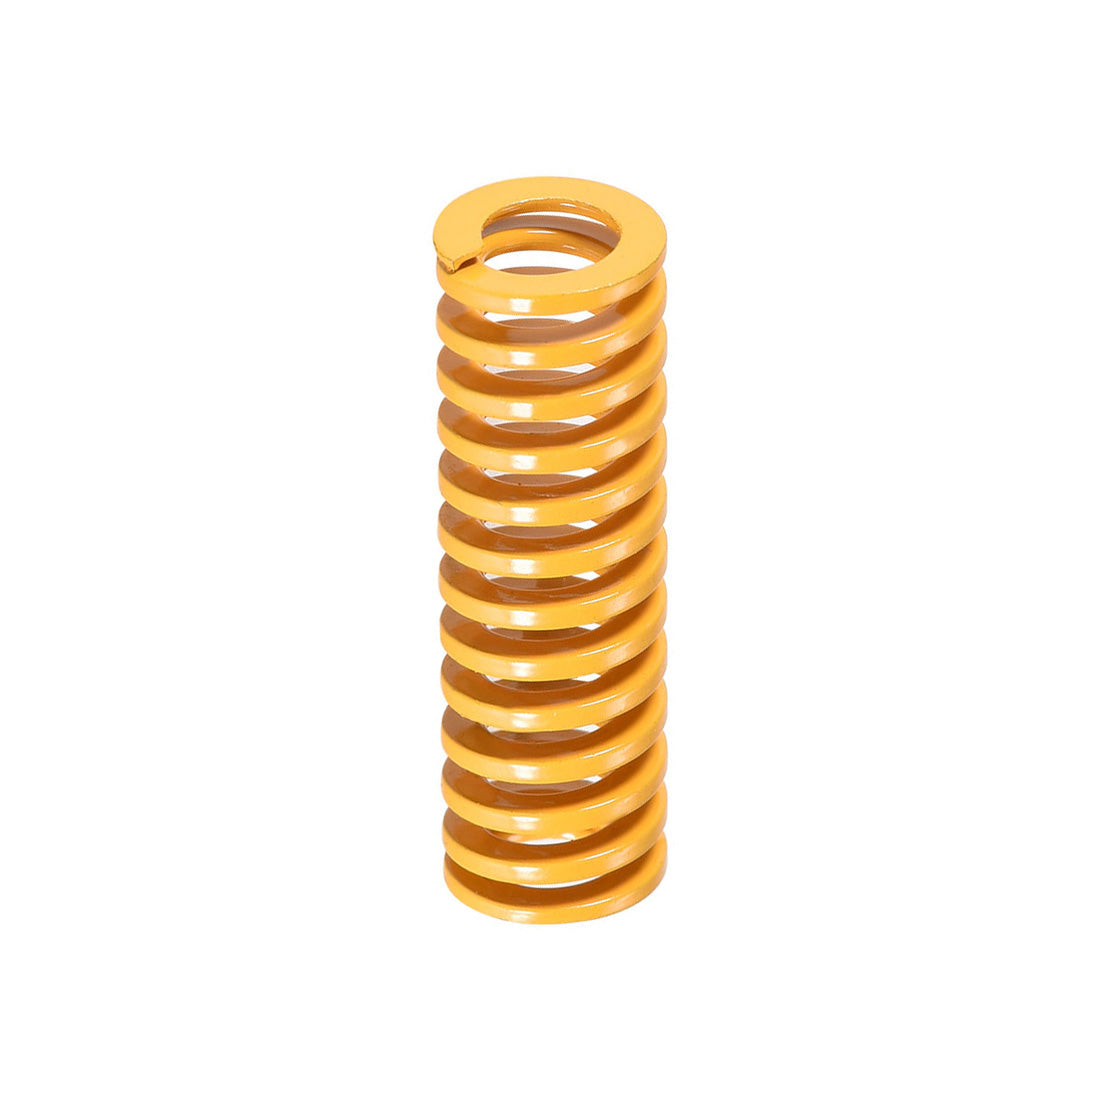 uxcell Uxcell Heated Bed Springs for 3D Printer Light Load Compression Spring, 8 x 25 mm 16pcs